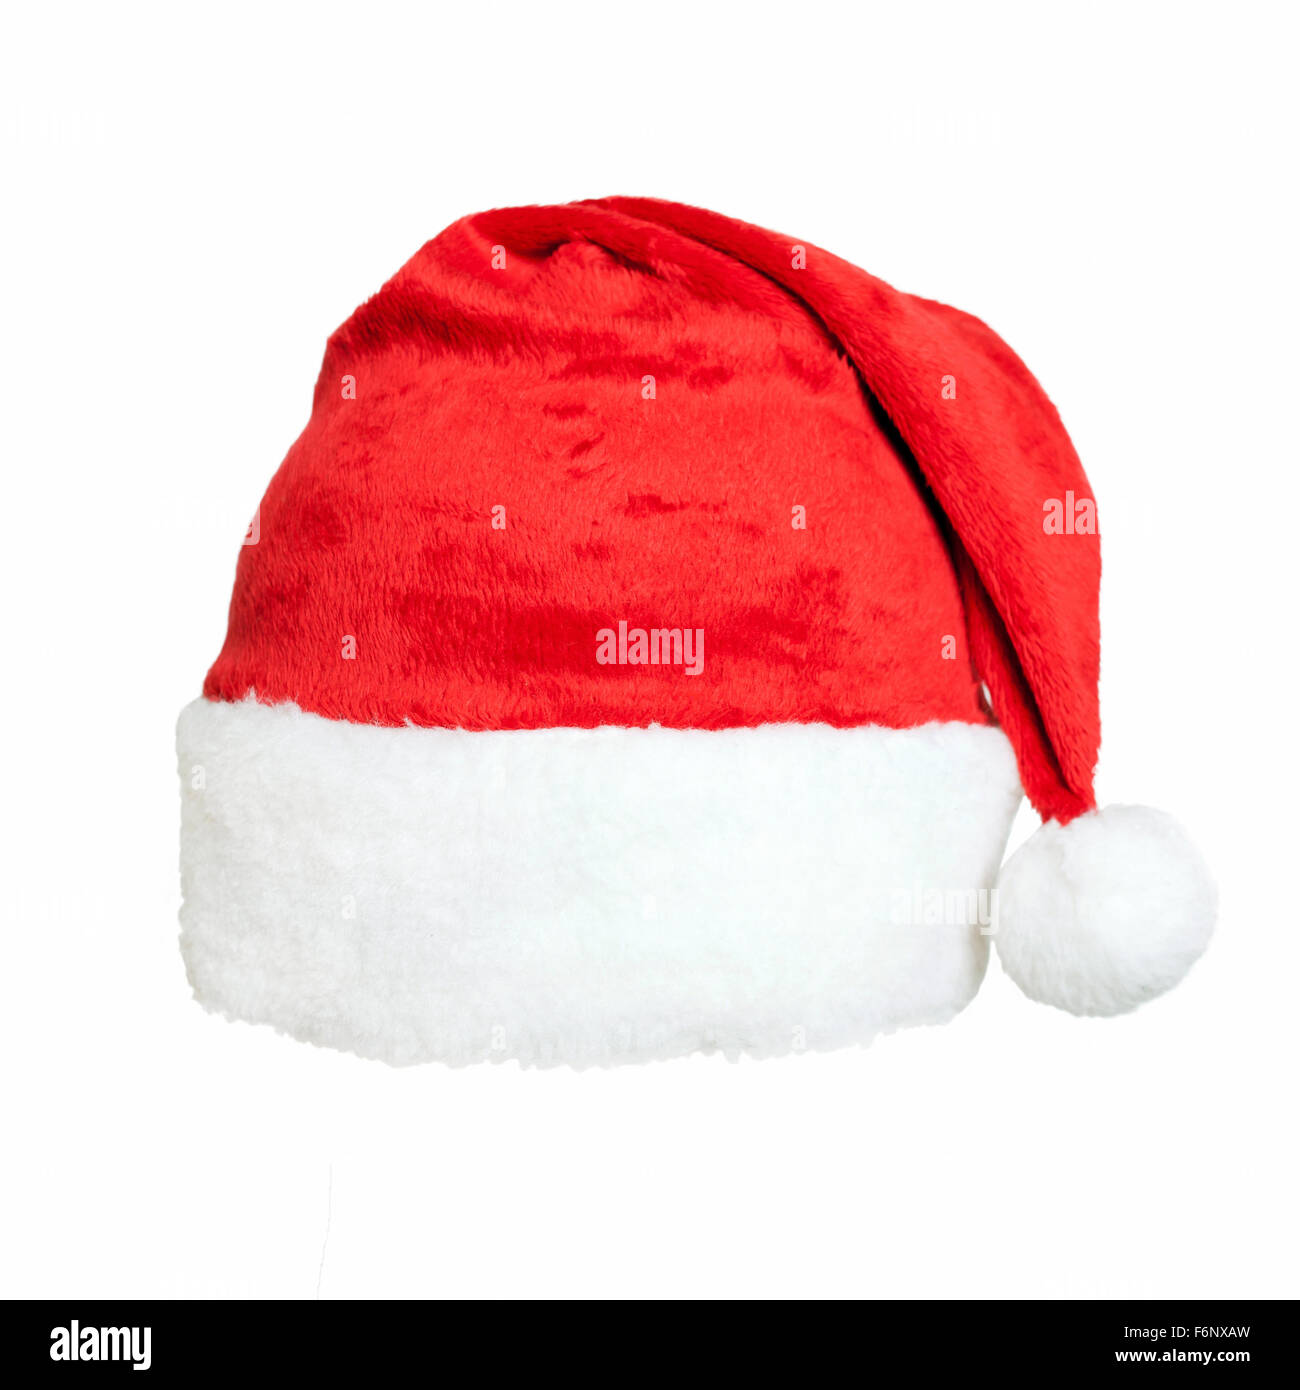 Santa Claus red hat close up isolated on white background. Stock Photo